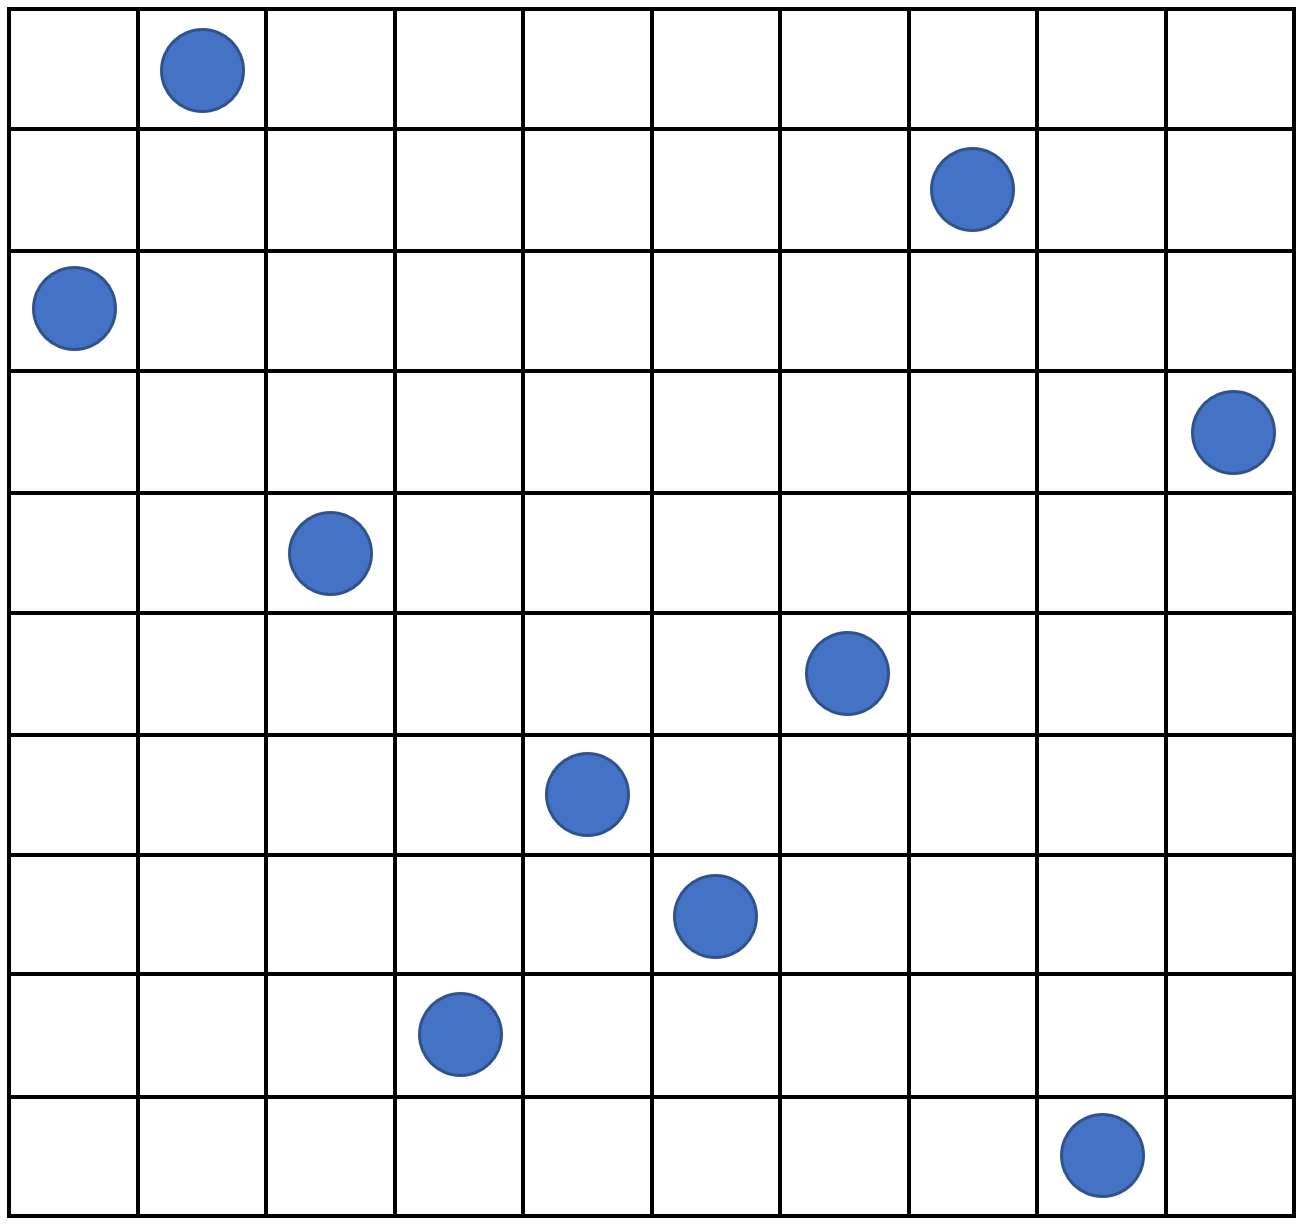 An example of Latin hypercube with 10 points in two dimensions: there is only one sample point in each row and each column.